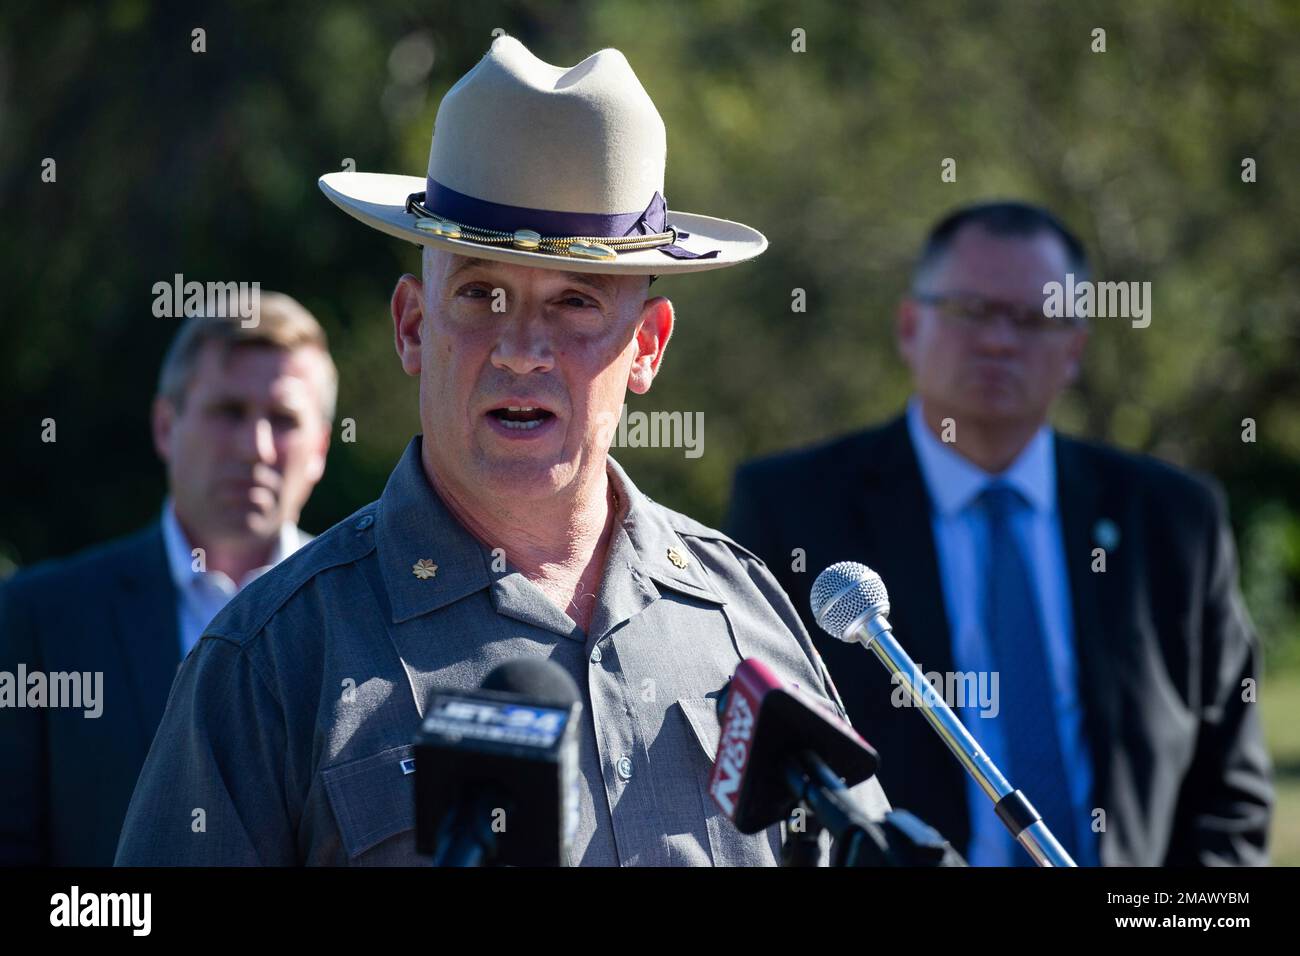 New York State Patrol Commander Major Eugene Staniszewski, speaks about the Salman Rushdie attack during a press conference outside a New York State Police station in Jamestown, N.Y., Friday, pic